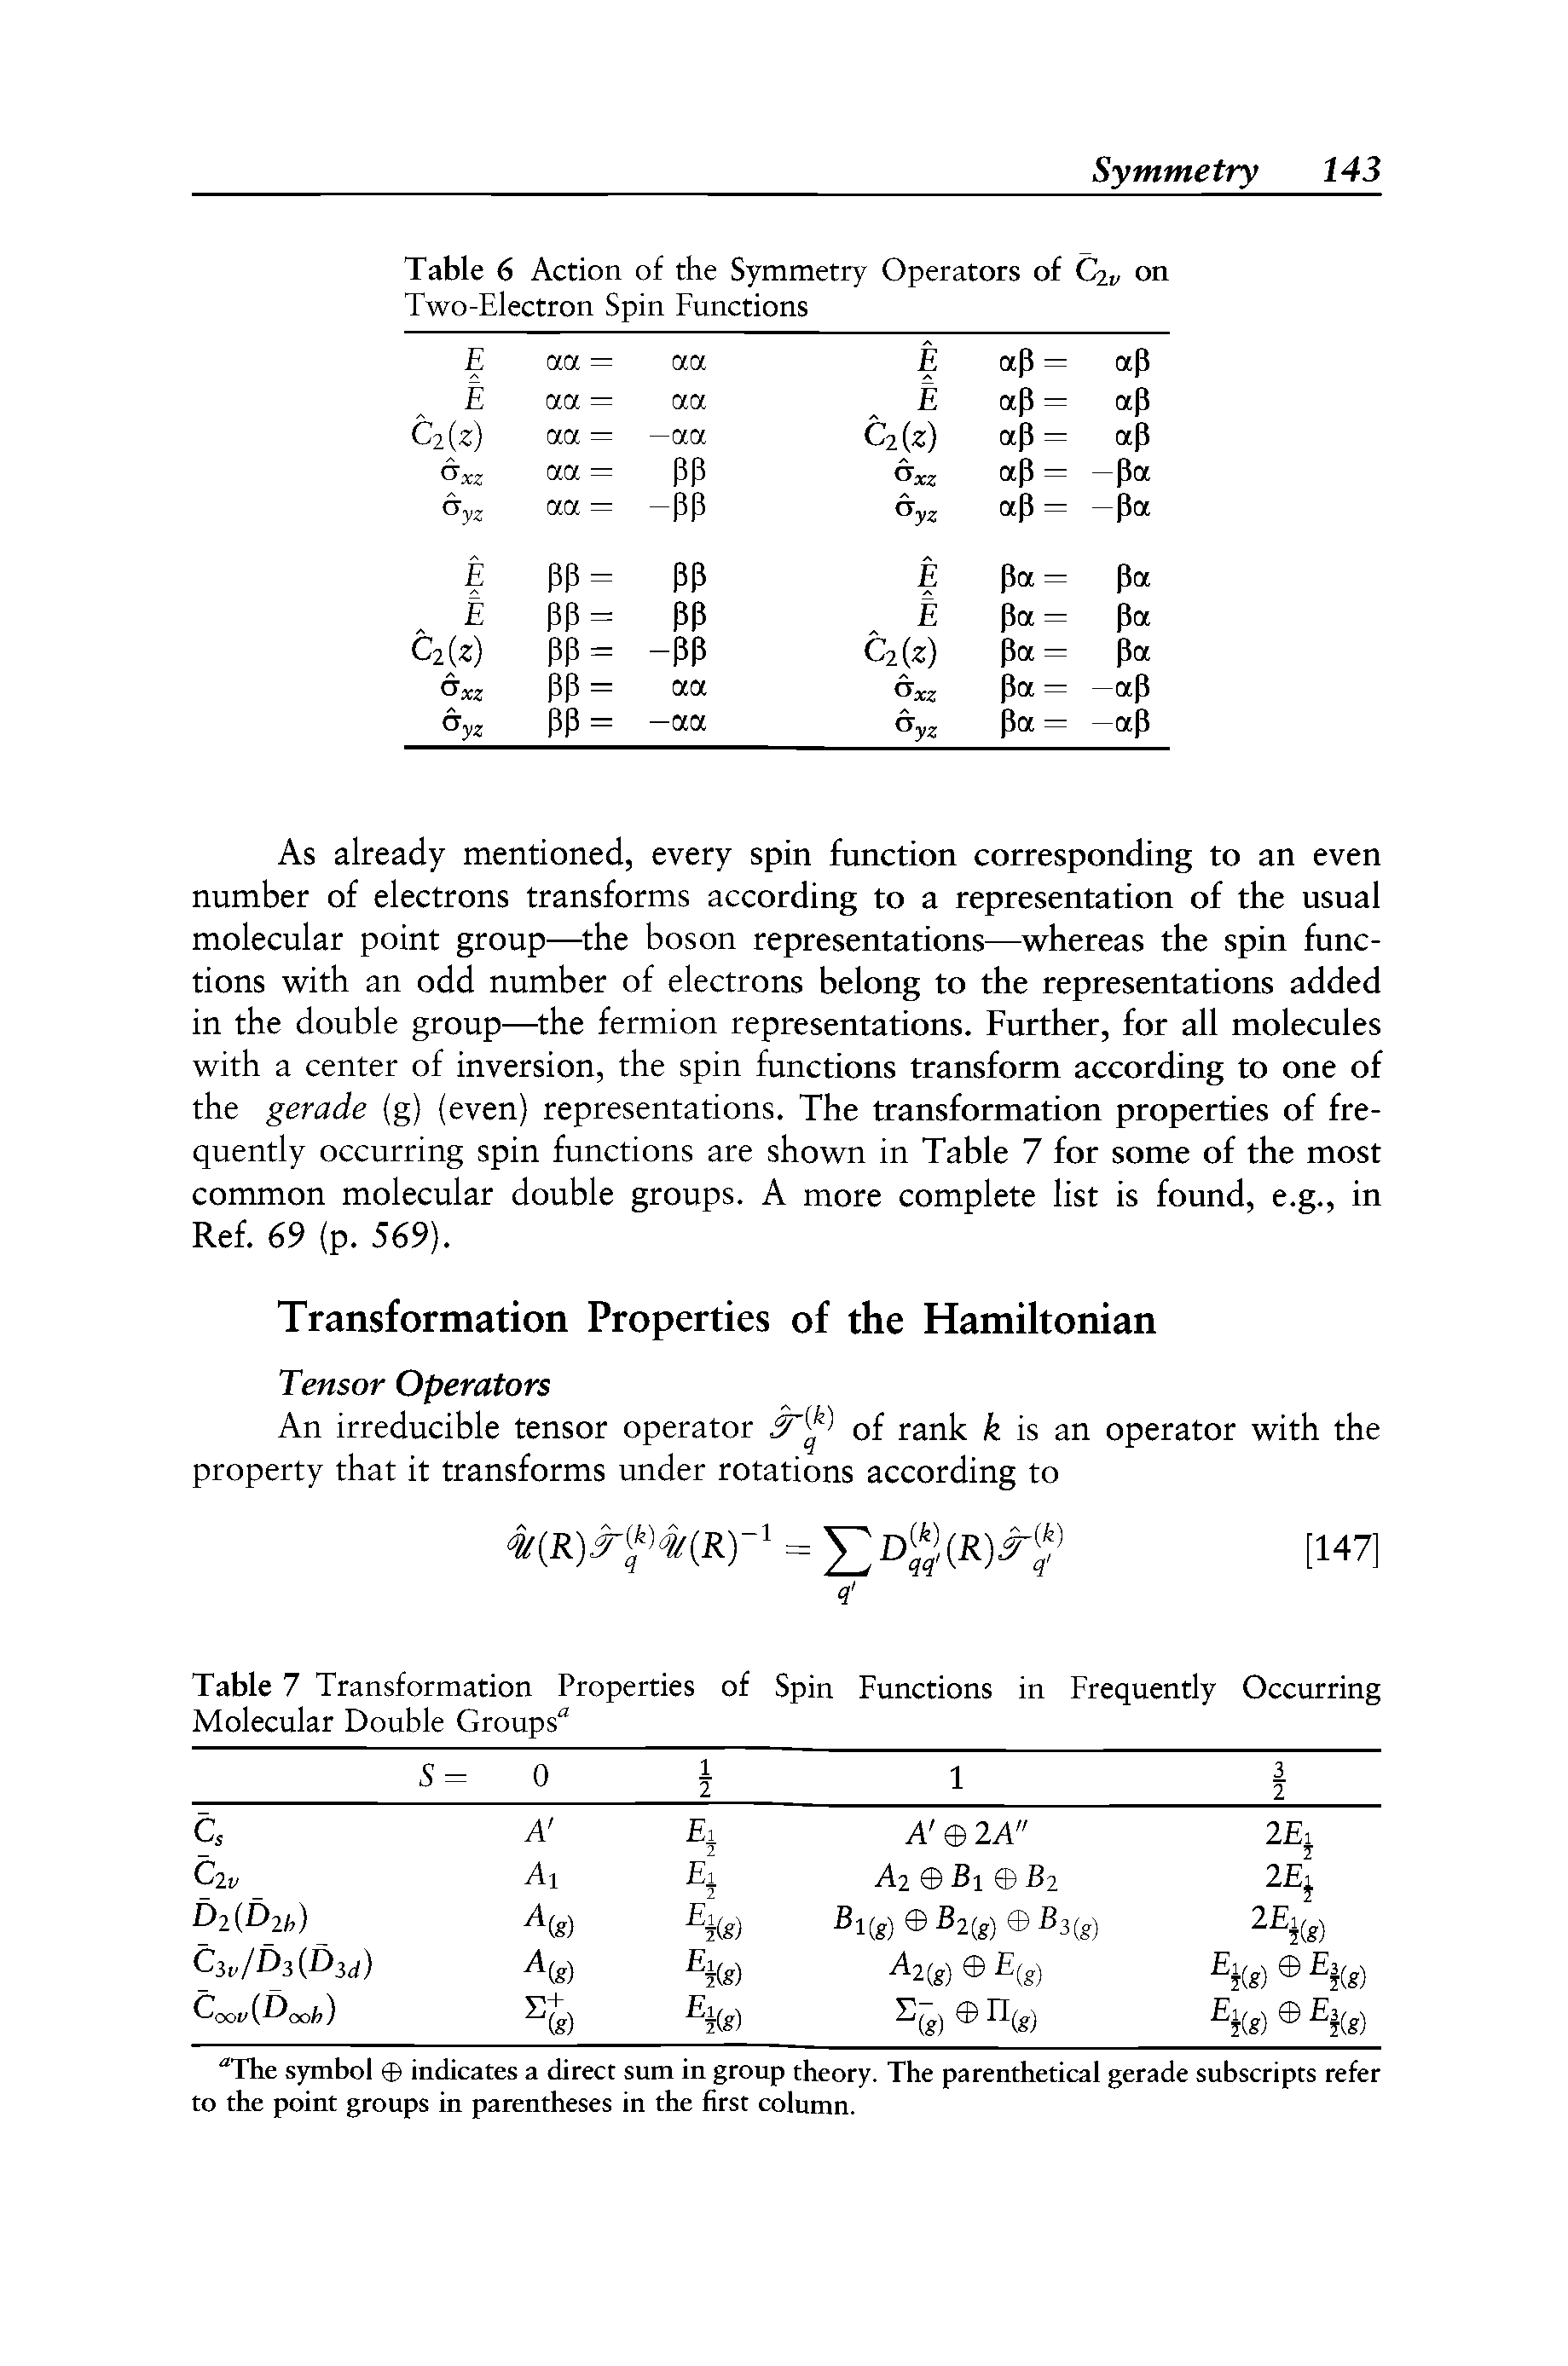 Table 6 Action of the Symmetry Operators of Civ on Two-Electron Spin Functions...